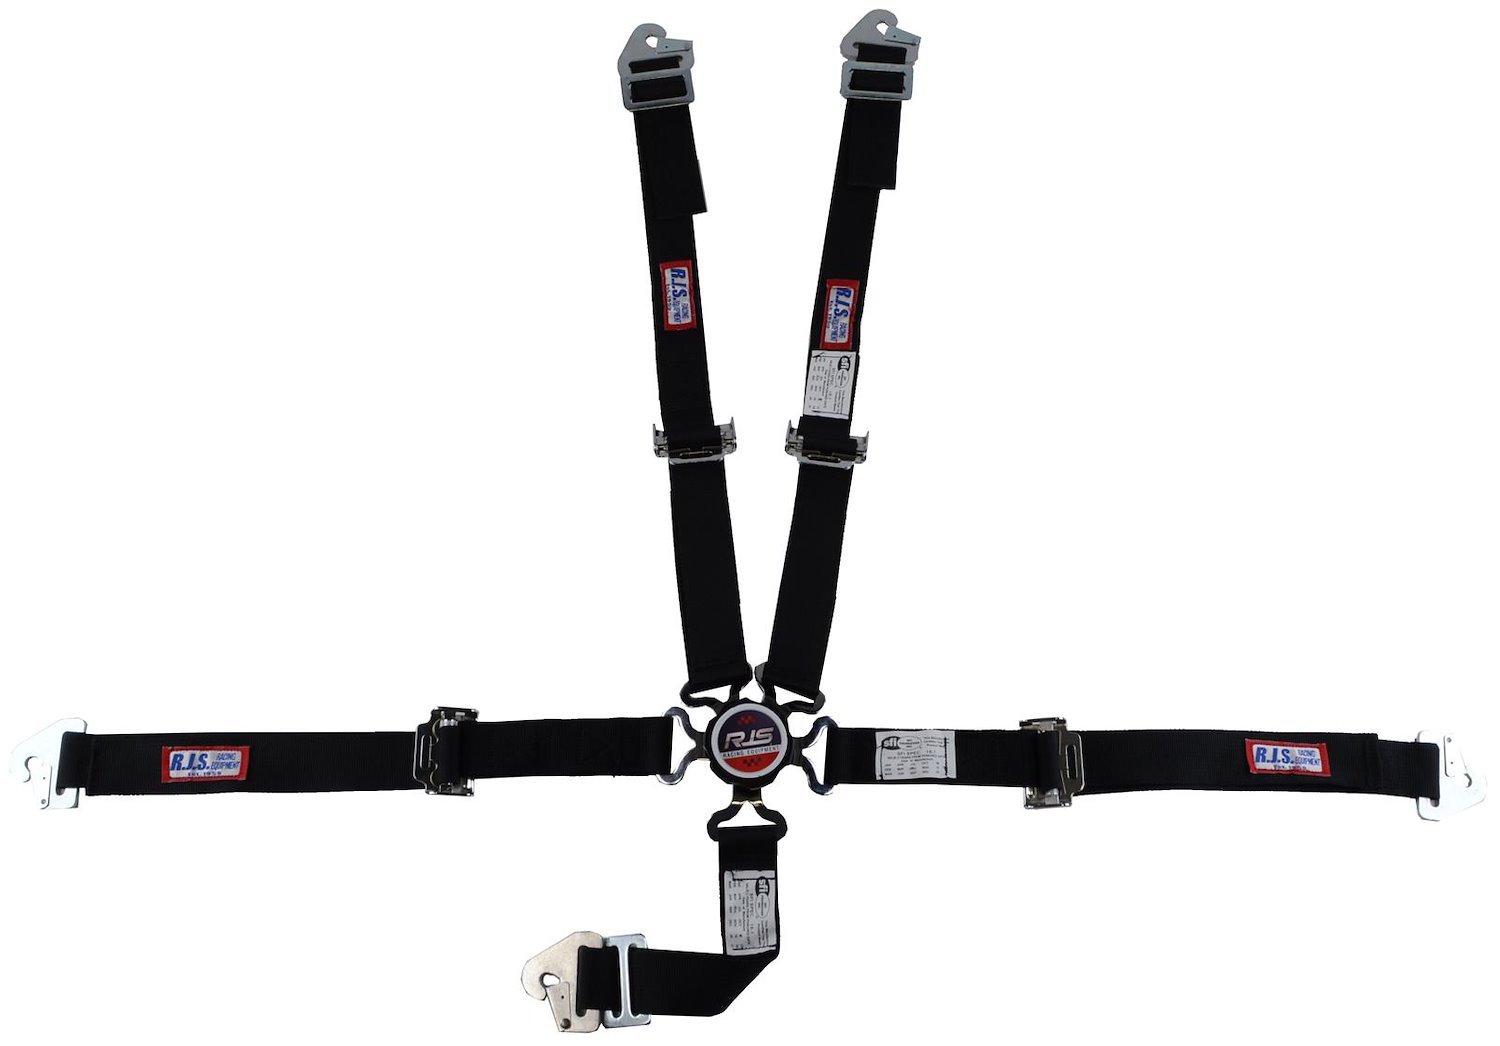 SFI 16.1 CAM-LOCK HARNESS 2 PULL DOWN Lap Belt 2 Shoulder Harness Individual FLOOR Mount 2 DOUBLESub ALL WRAP ENDS GRAY